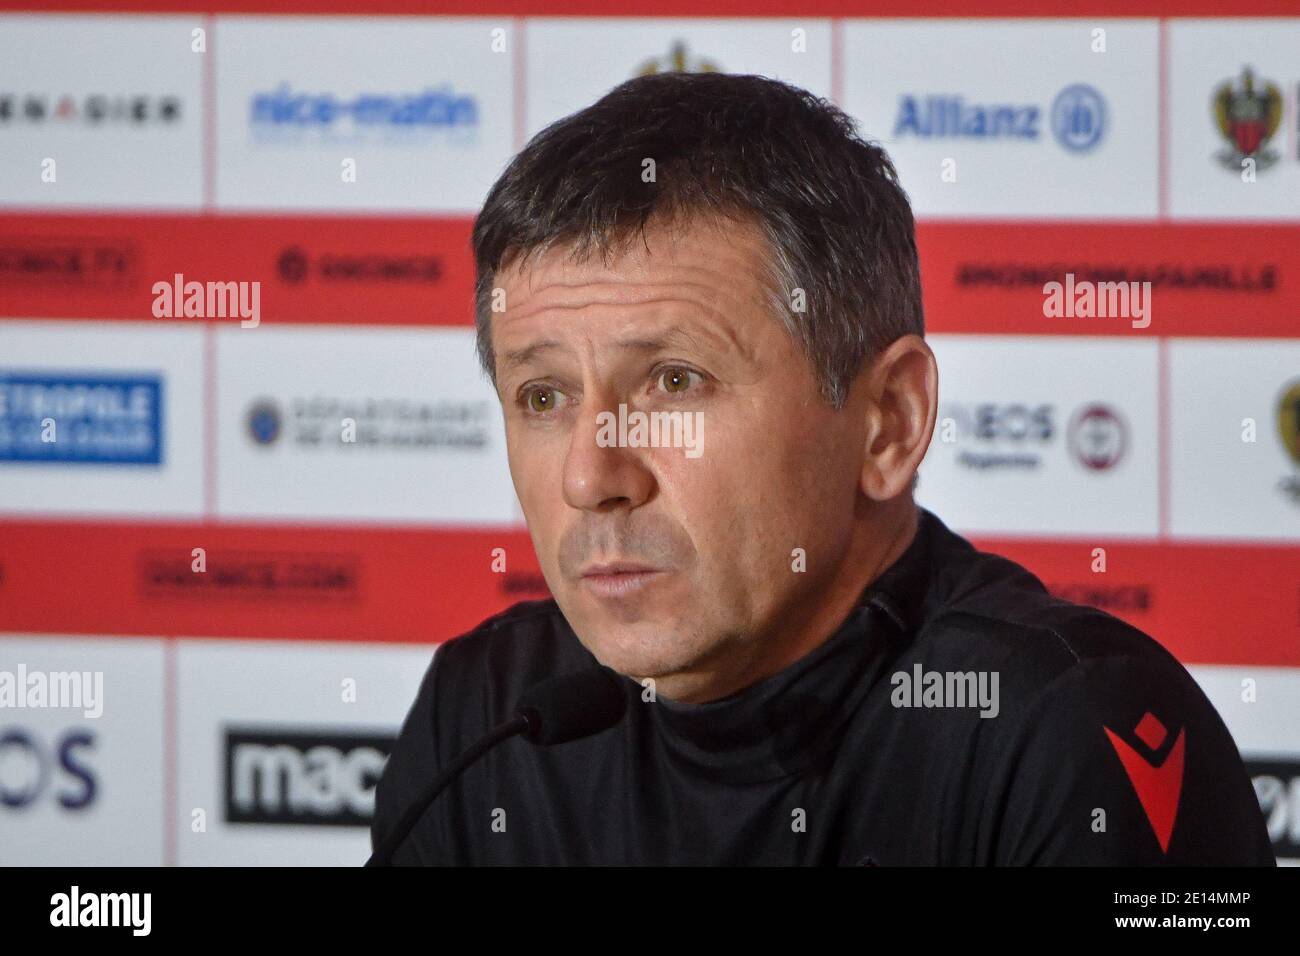 Adrian Ursea Ogc Nice S Press Conference Preceding The Stade Brestois Ogc Nice Meeting 18th Day Of Ligue 1 At The Ogc Nice Training Center In Nice France On January 04